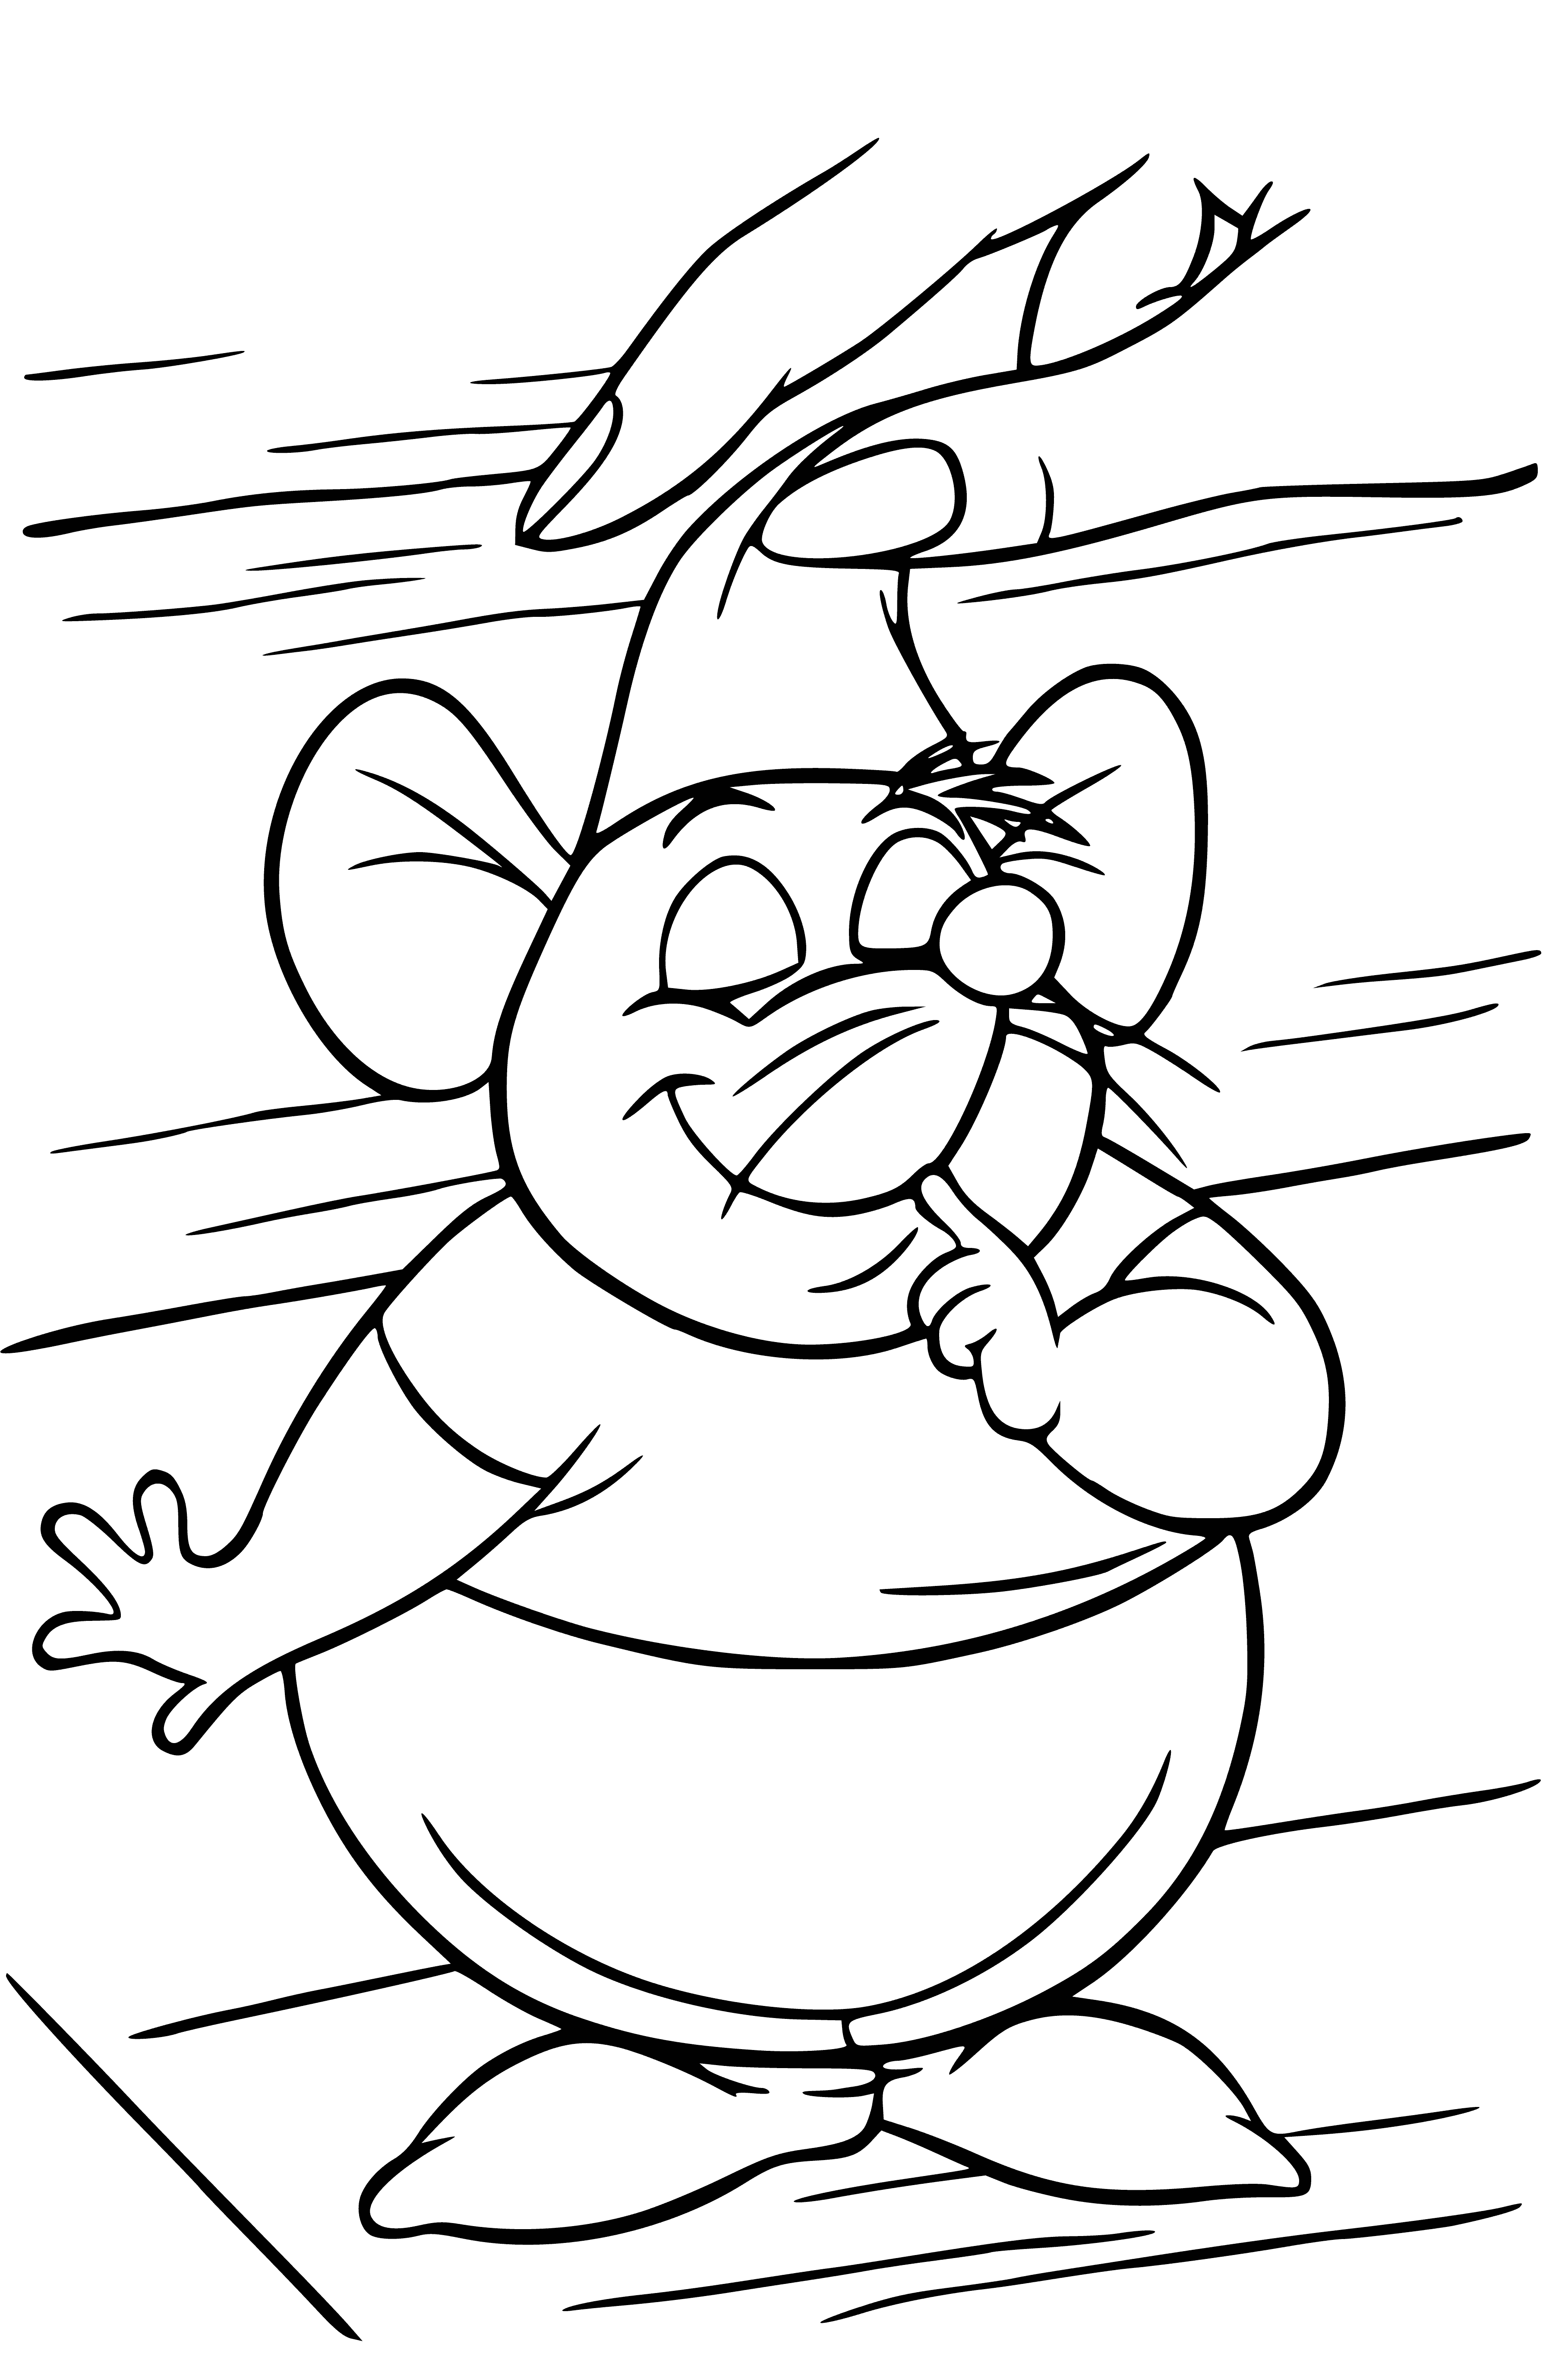 Mouse in a cap coloring page